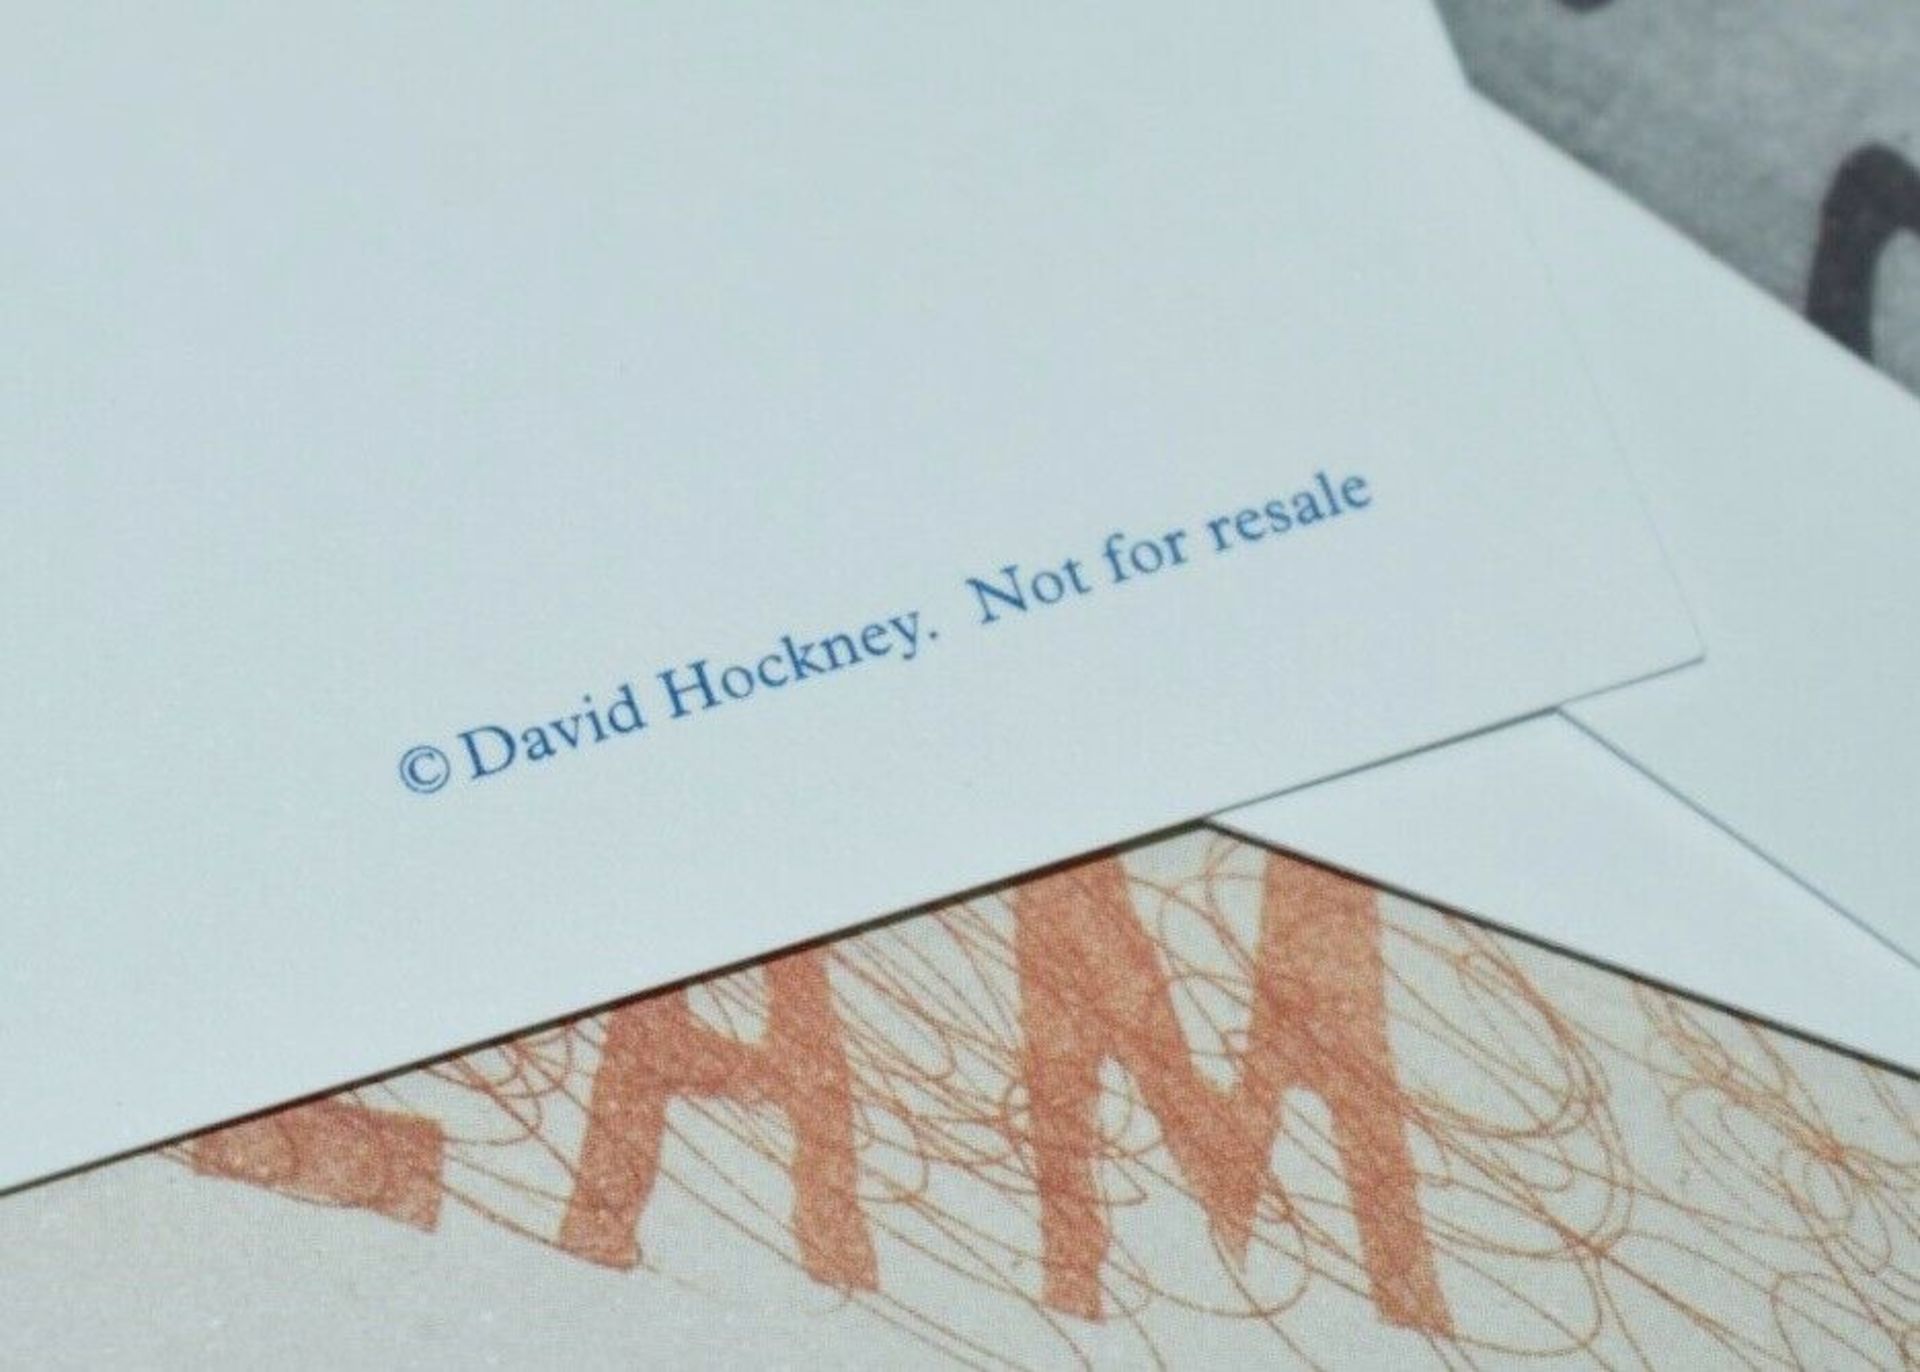 1 x David Hockney Words & Pictures - British Council Touring Program With 11 Prints - Brand New - Image 4 of 9